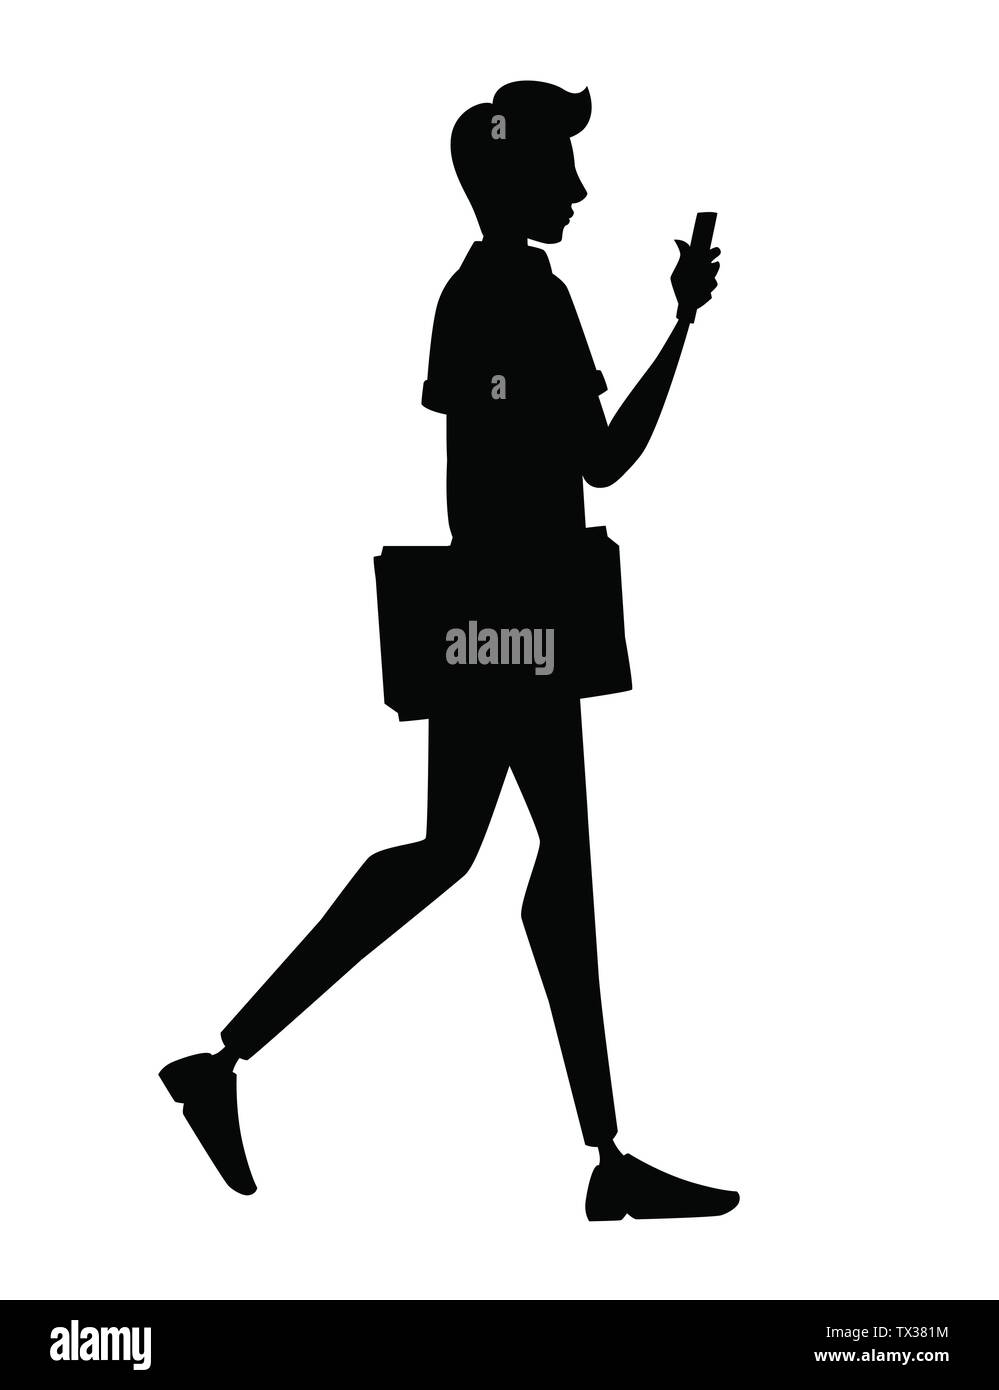 Black silhouettes man goes and holds in one hand a folder for paper in the other hand a smartphone cartoon character design flat vector illustration Stock Vector